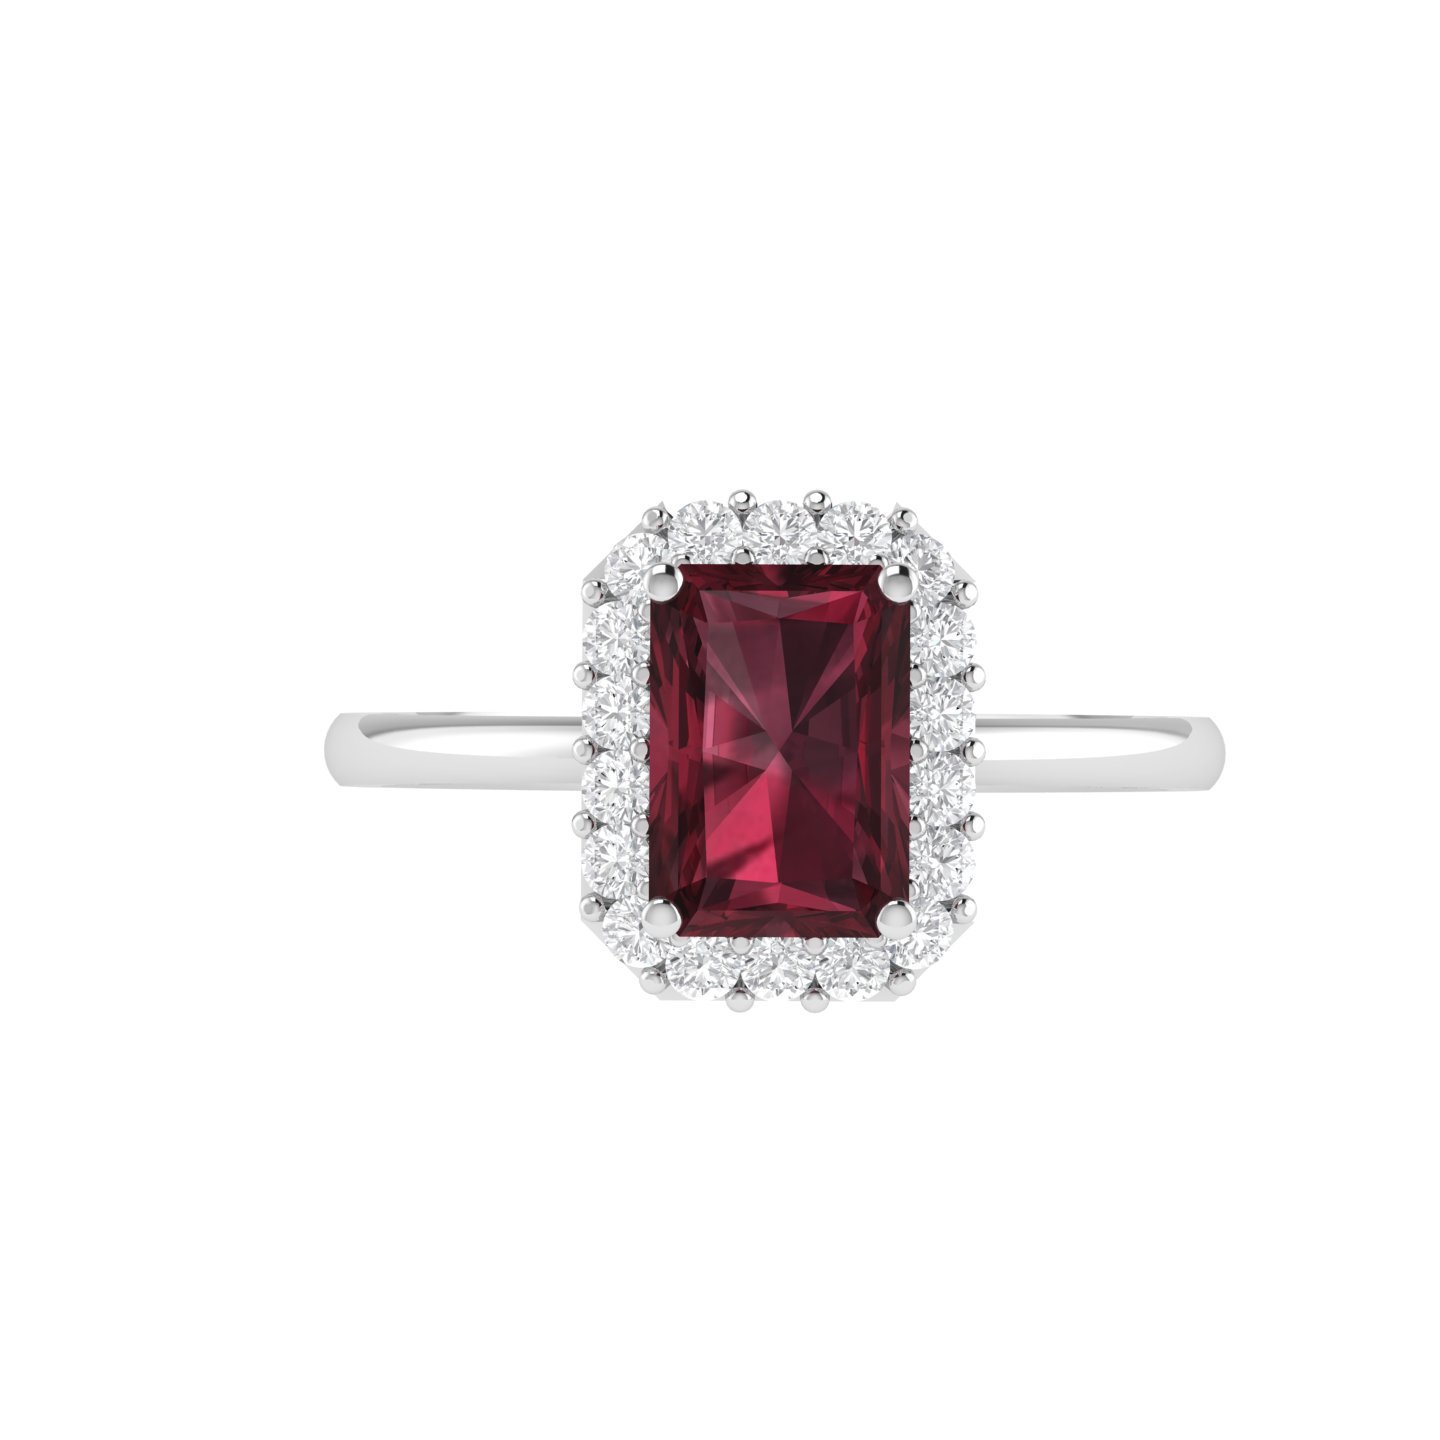 Diana Emerald  Cut Garnet and Shimmering Diamond Ring in 18K Gold (0.25ct)